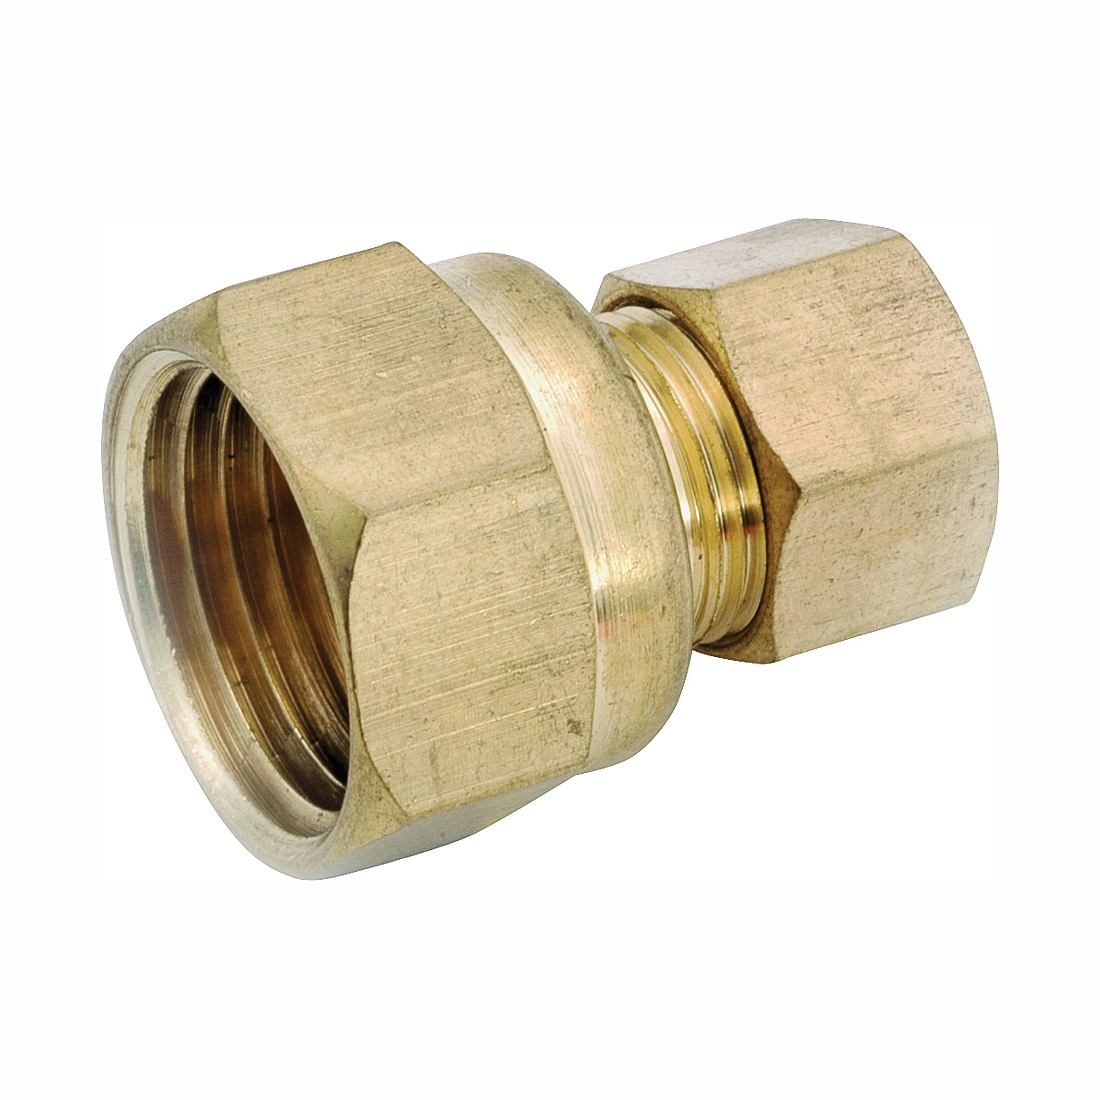 750066-0302 Tubing Coupling, 3/16 x 1/8 in, Compression x FIP, Brass